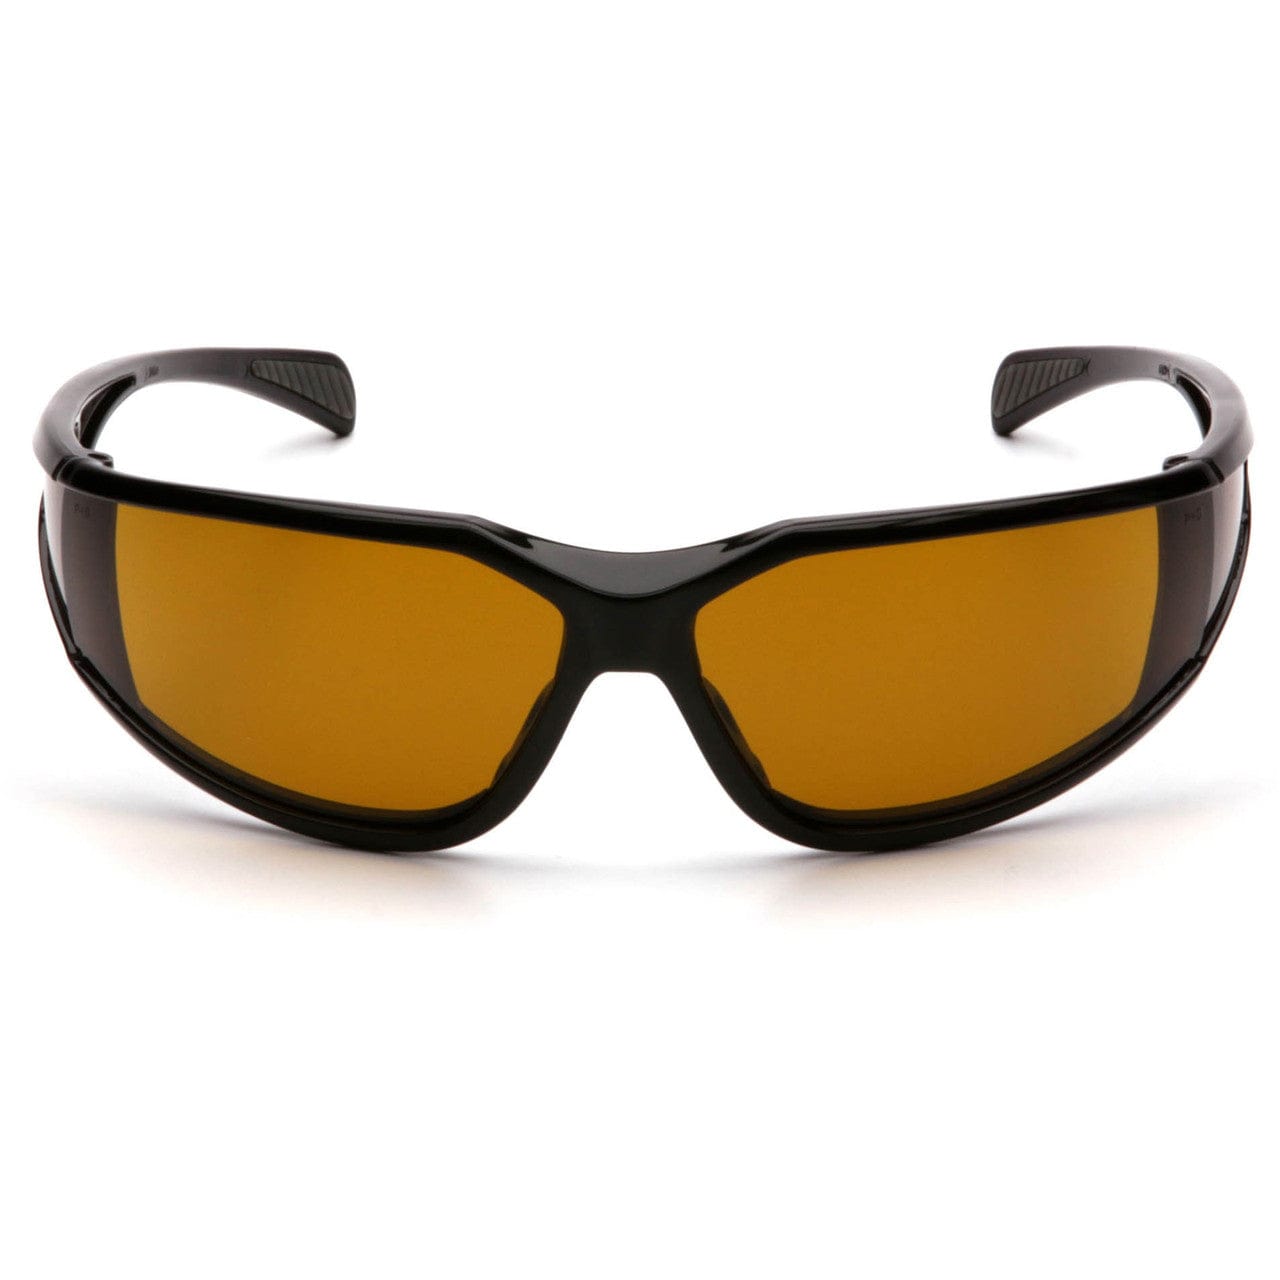 Pyramex Exeter Safety Glasses with Black Frame and Amber Anti-Fog Lens SB5133DT Front